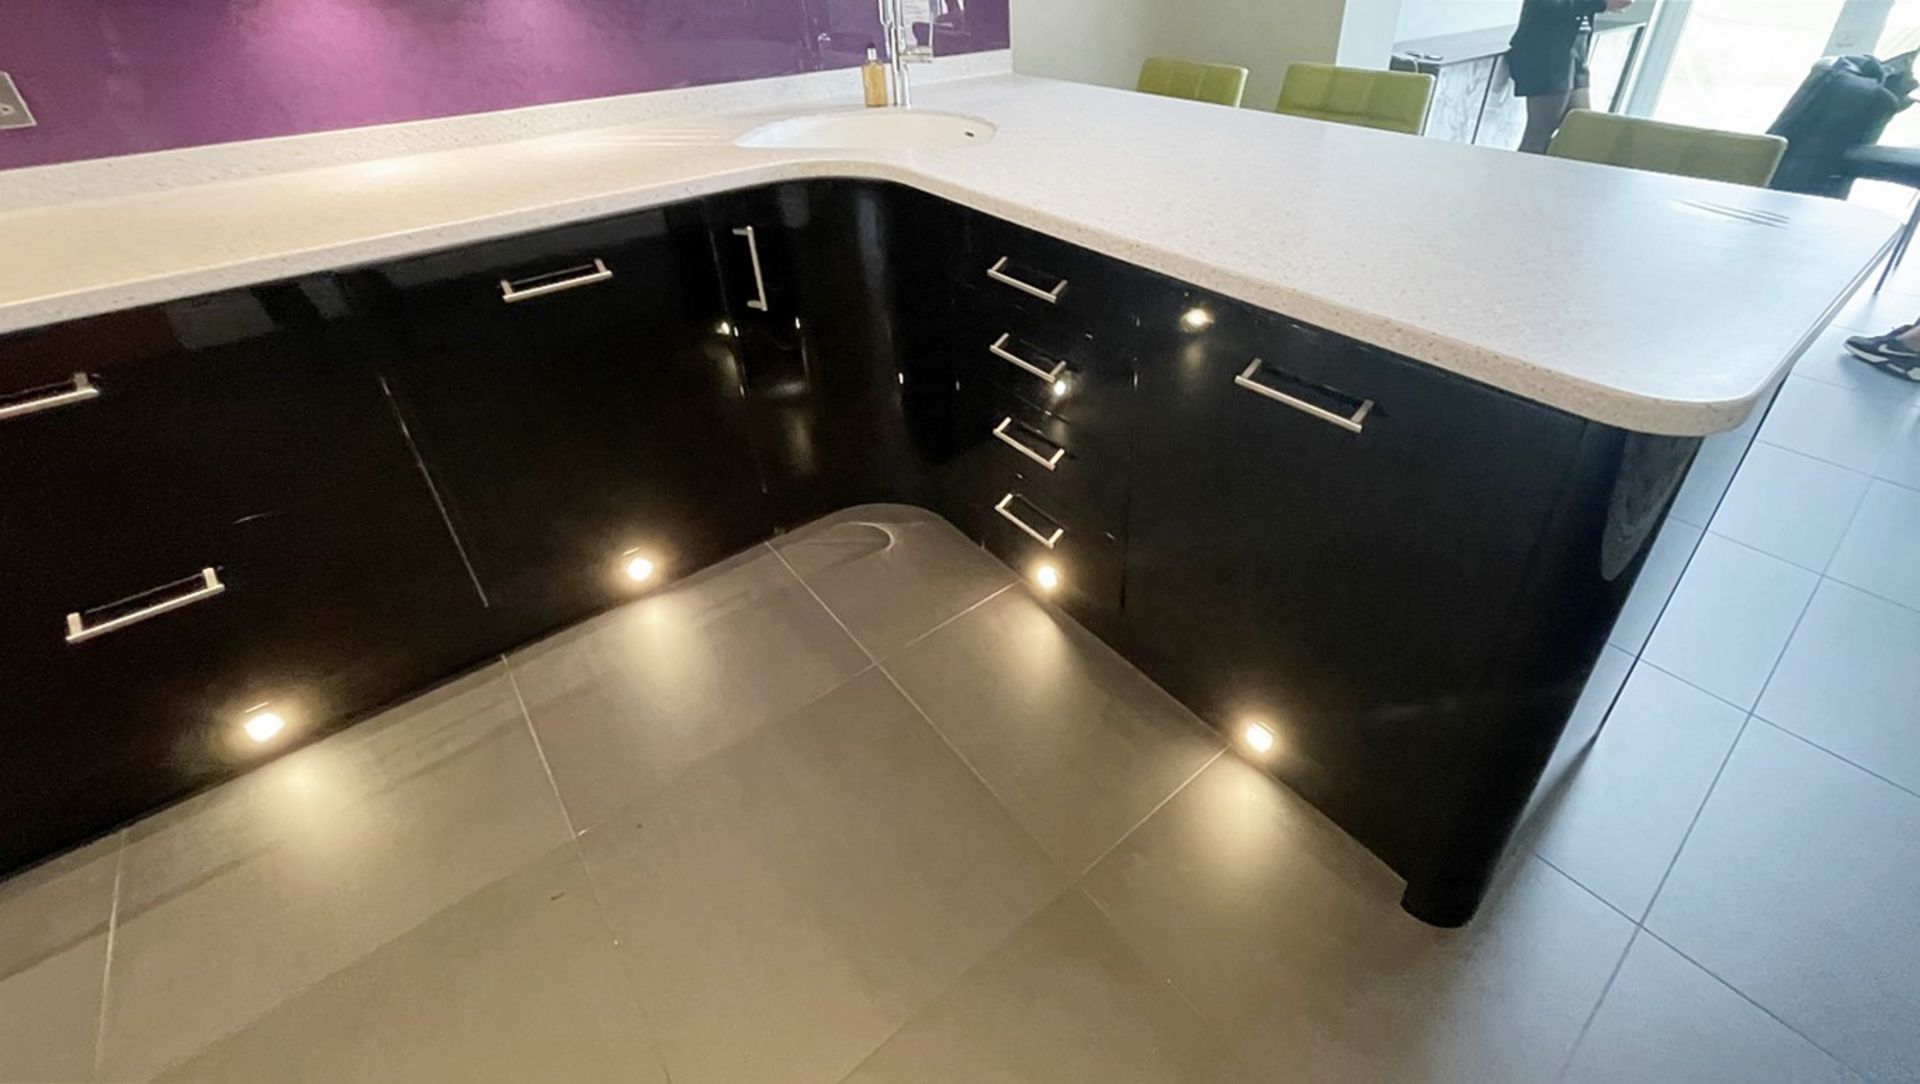 1 x MAGNET Modern Black Gloss Fitted Kitchen With Premium Branded Appliances + Corian Worktops - Image 18 of 62